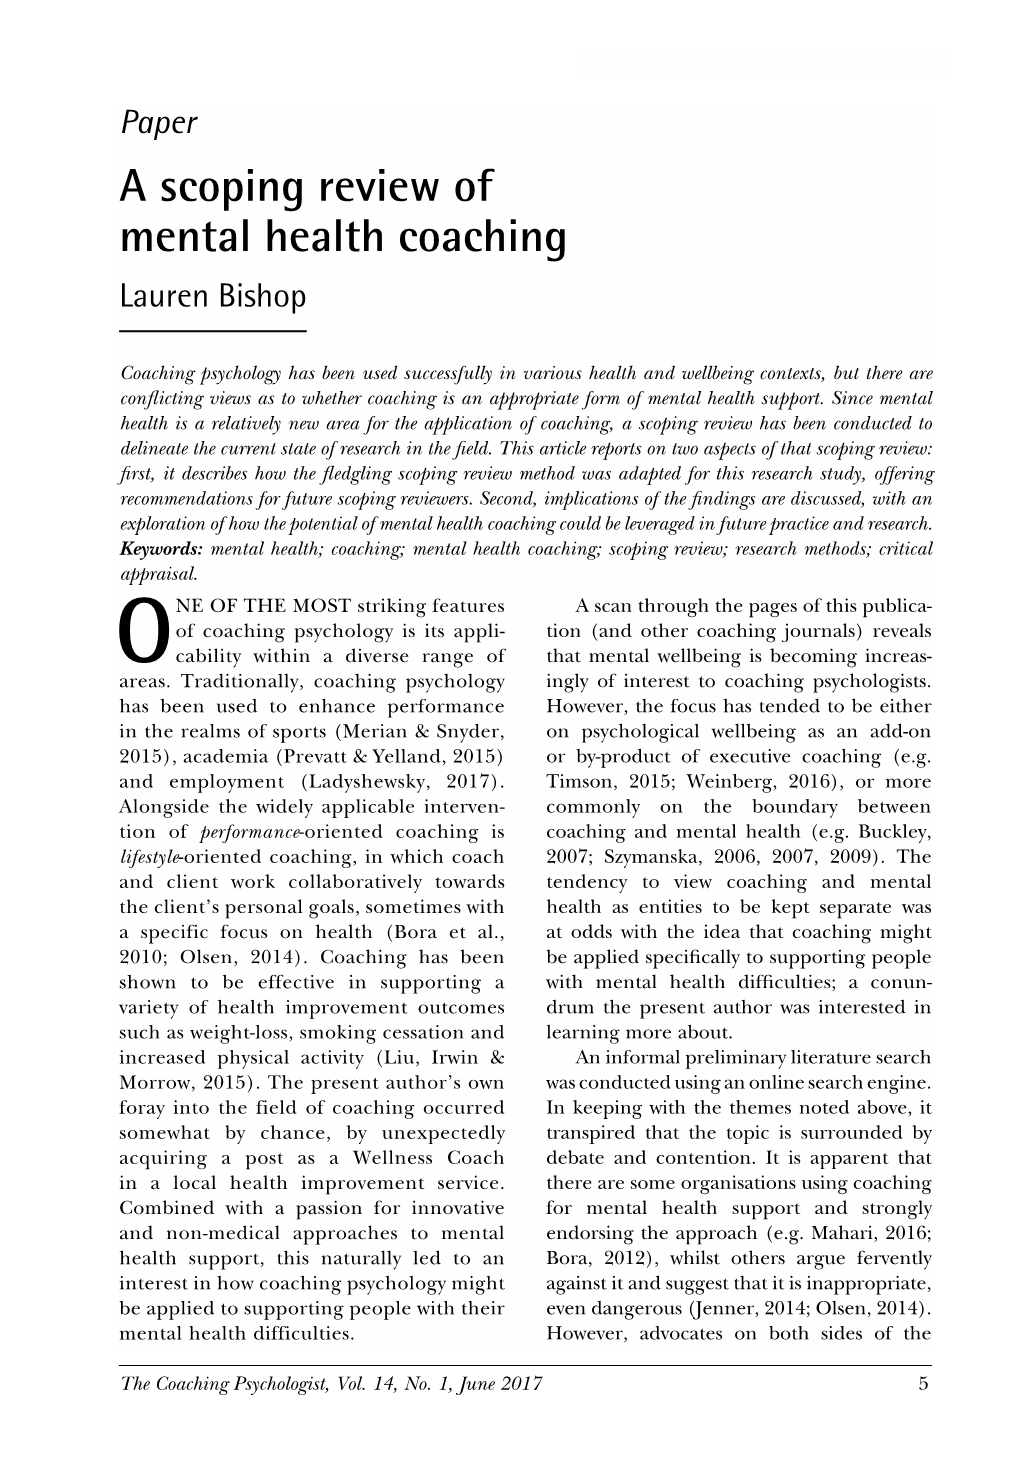 A Scoping Review of Mental Health Coaching (2017)